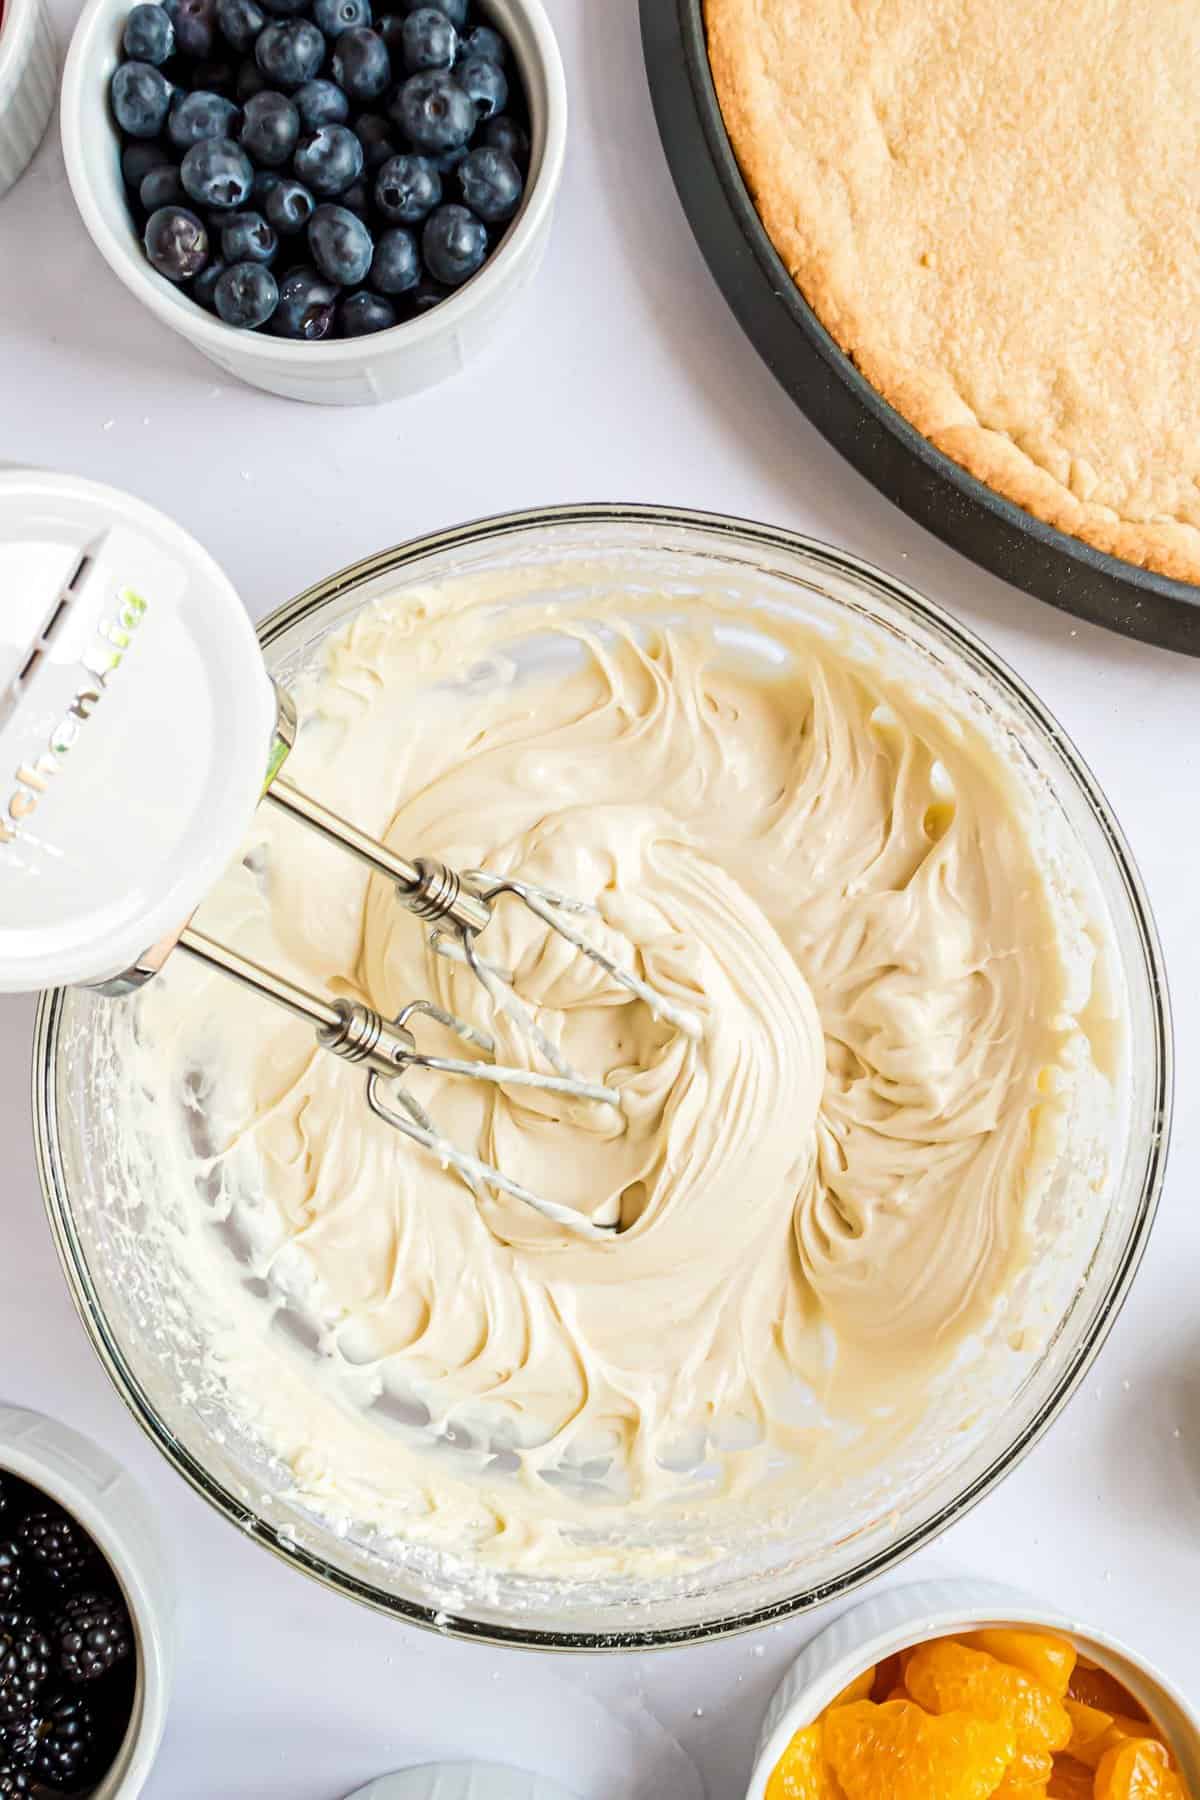 Making cream cheese frosting